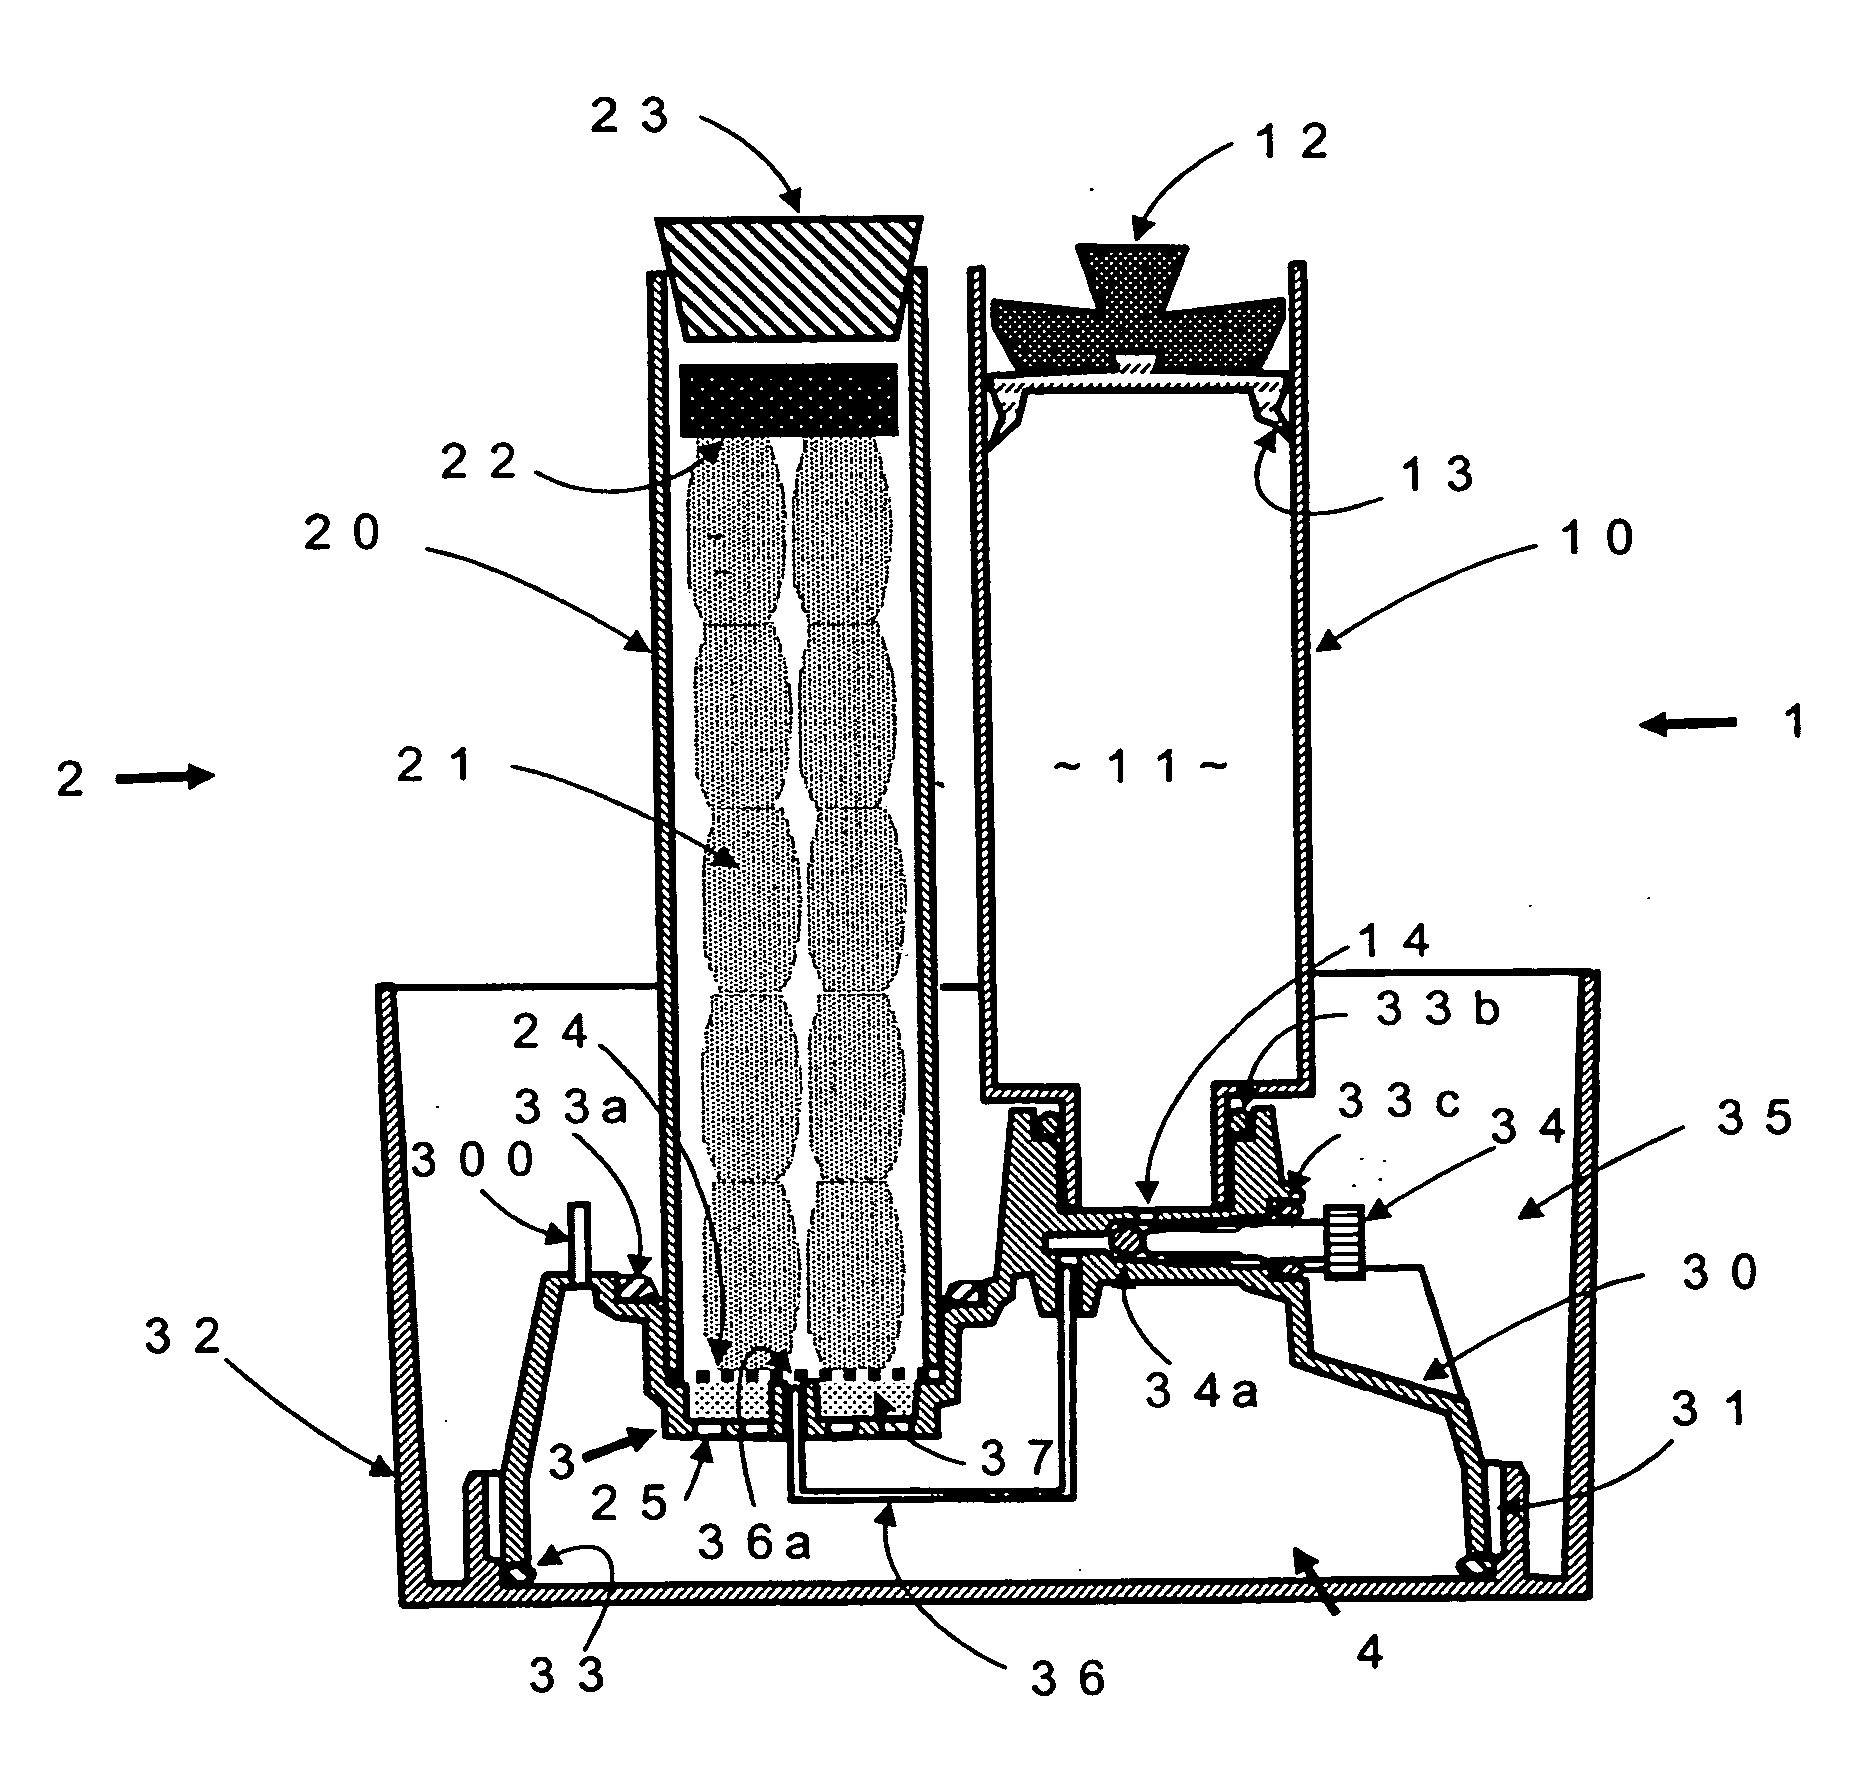 Fuel gas generation and supply device